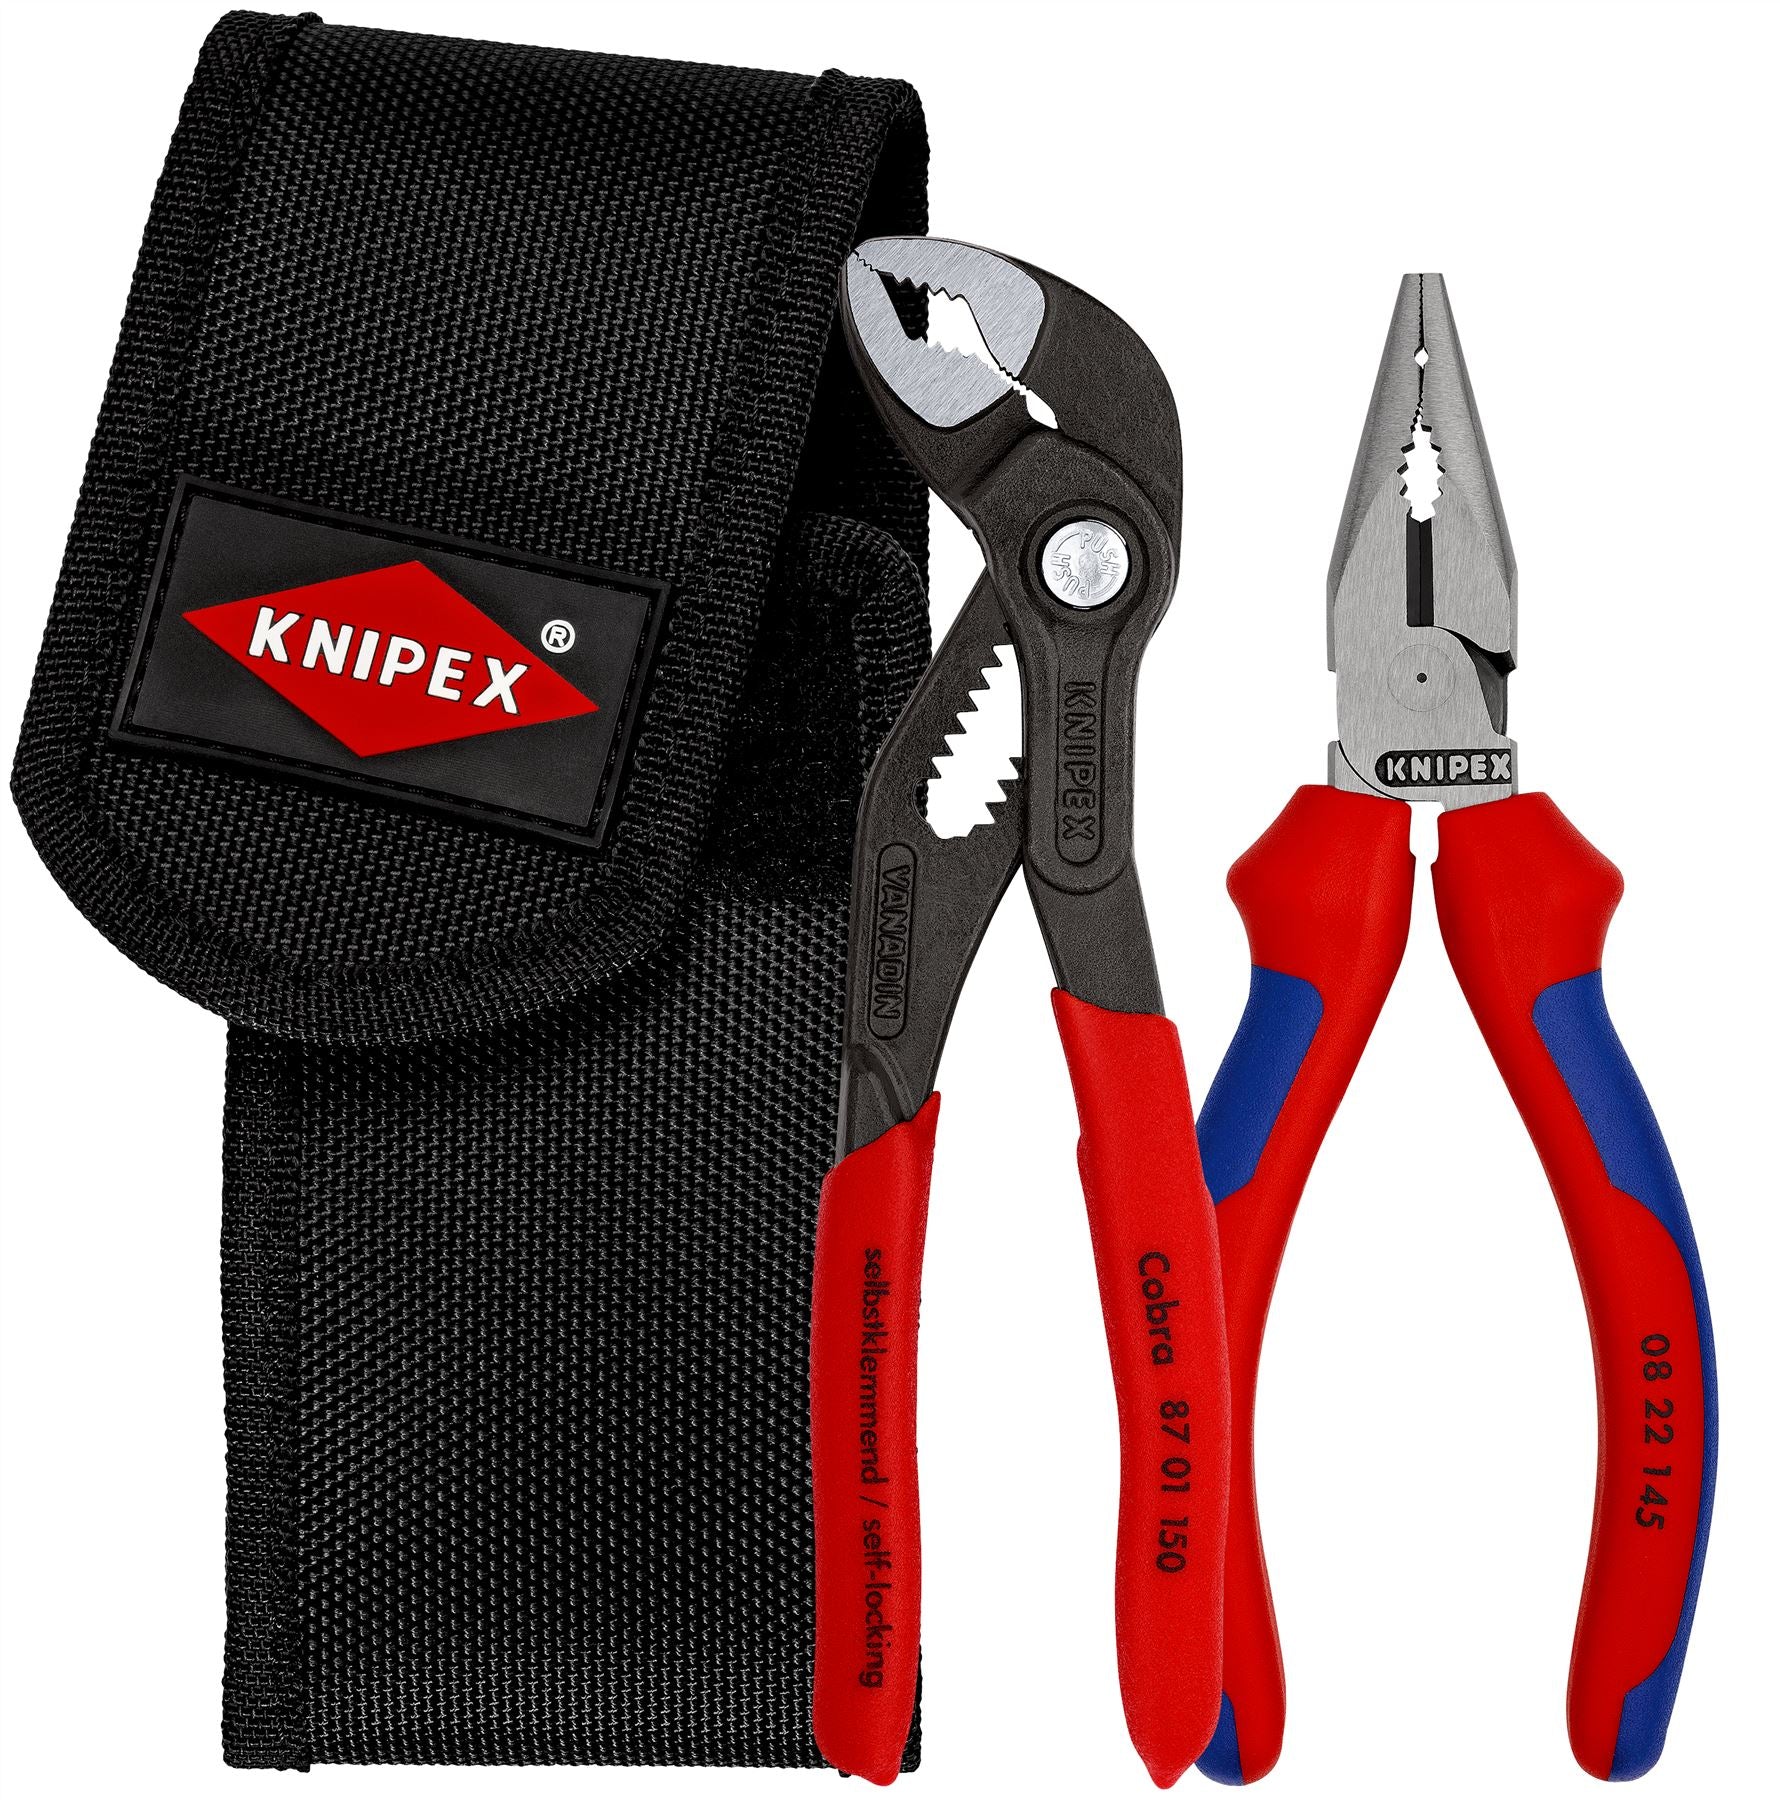 Knipex Mini Pliers Set in Belt Tool Pouch 2 Piece 150mm Cobra 145mm Needle Nose 00 20 72 V06